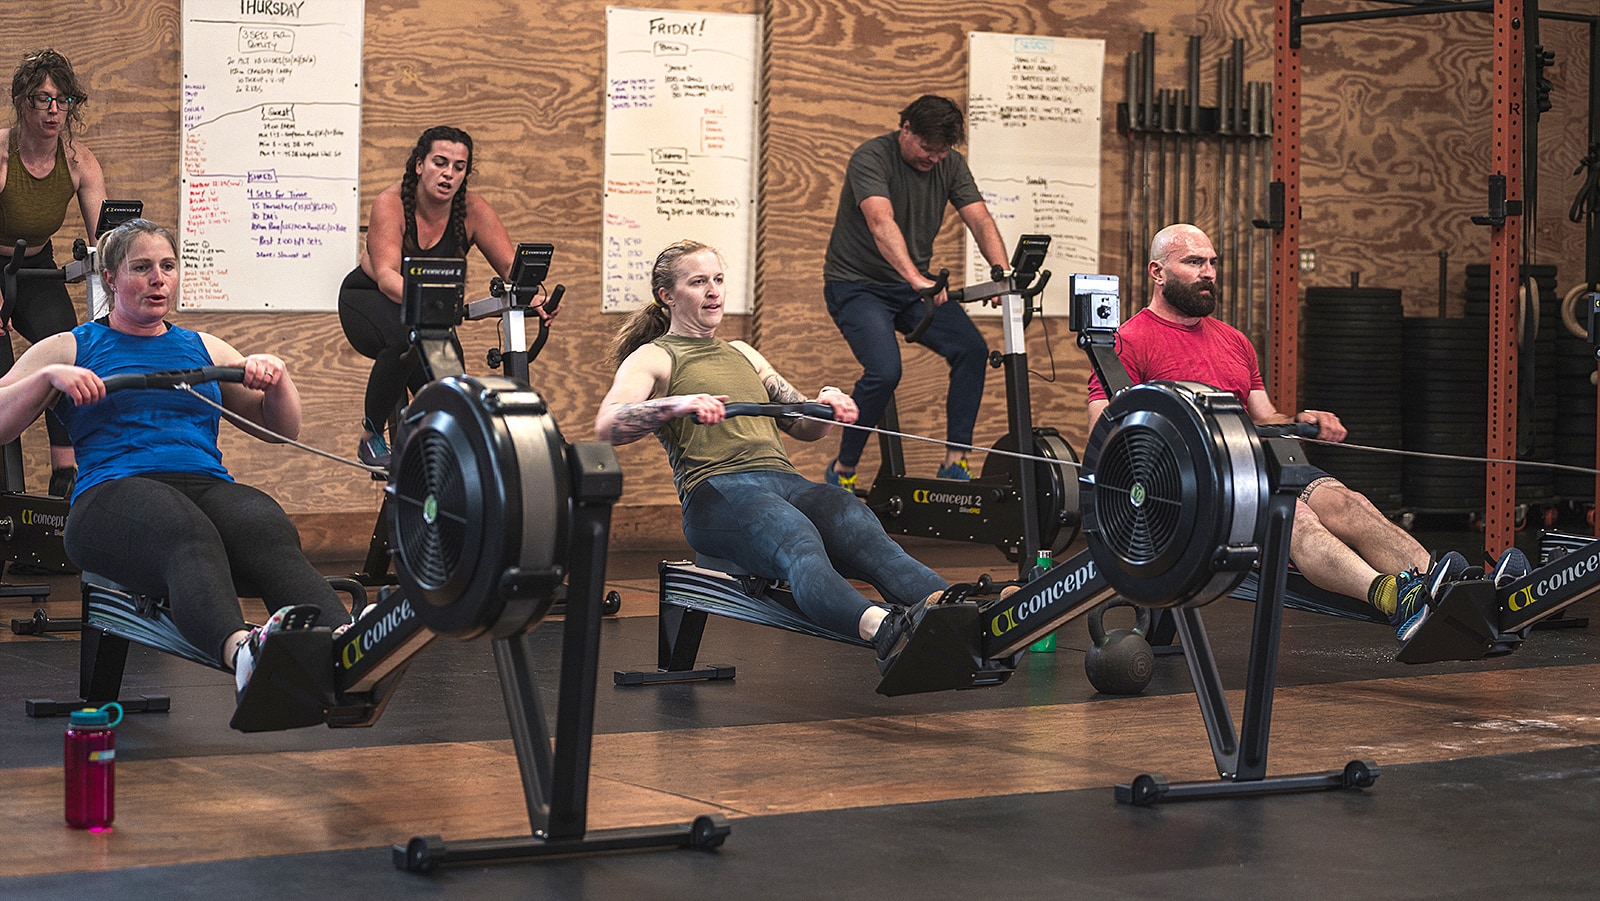 Get Started With Your Concept2 Erg Concept2